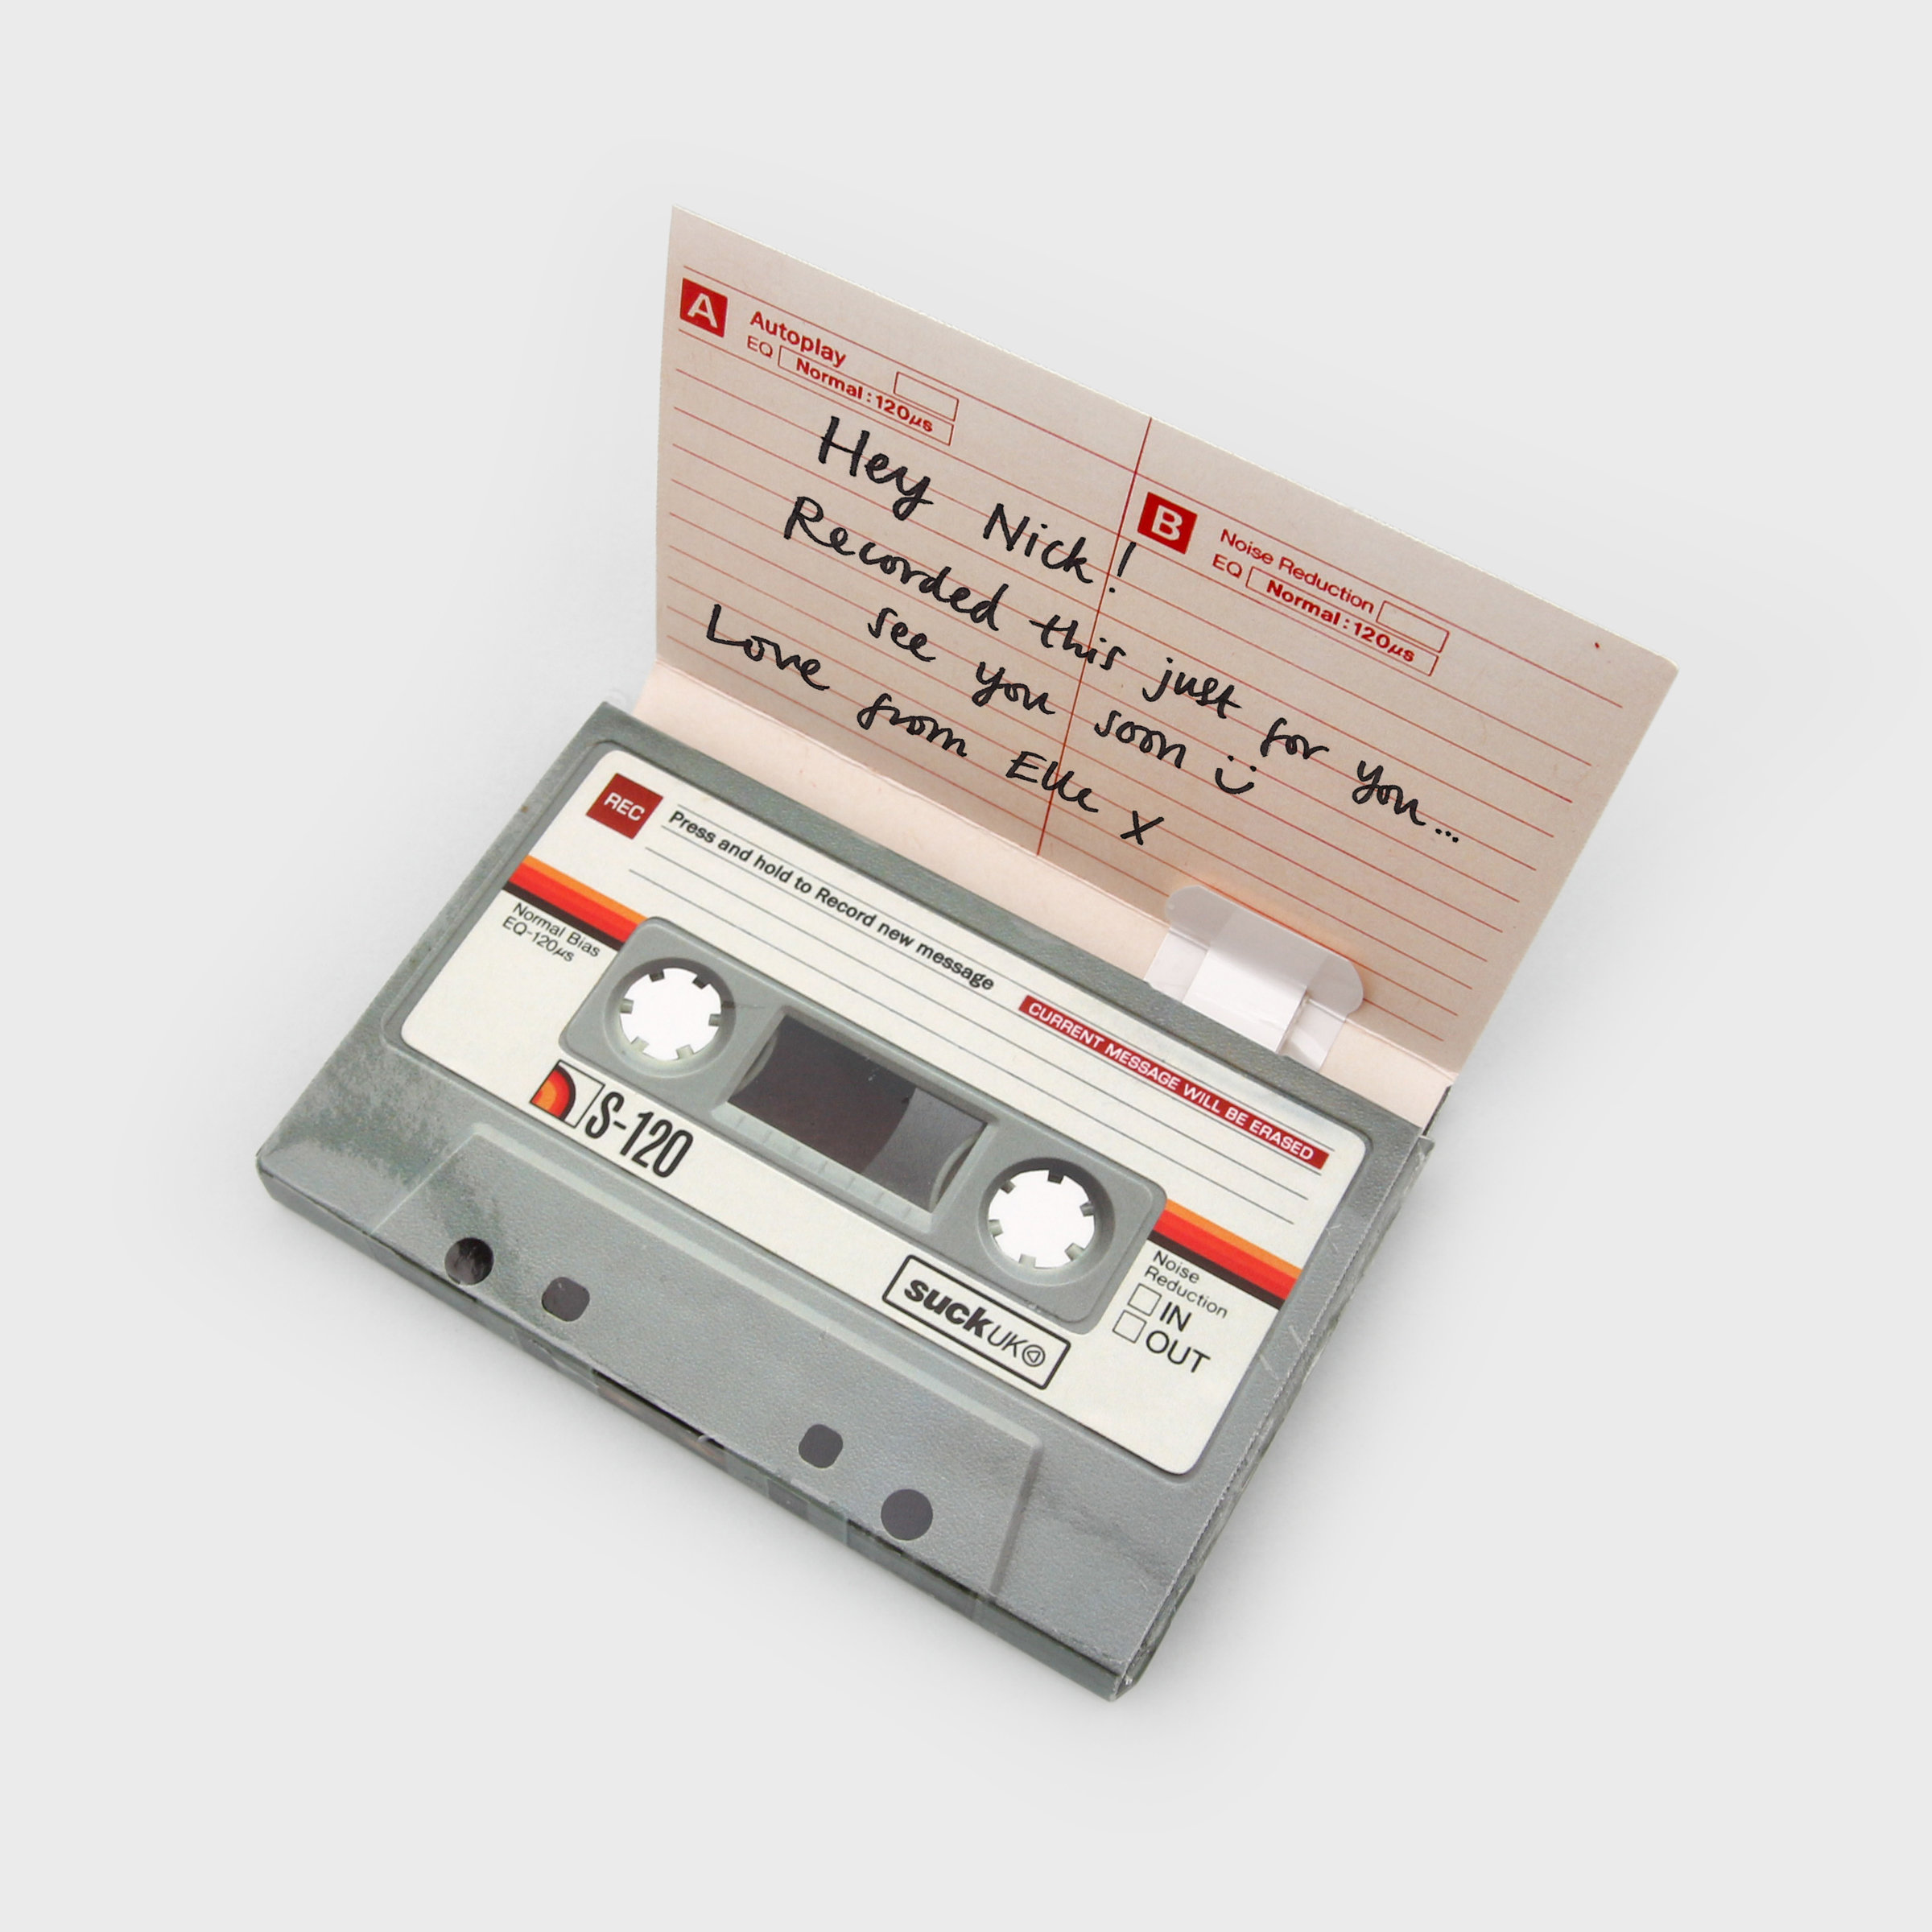 ReRecordable Greeting Card in the shape of a Mix Tape